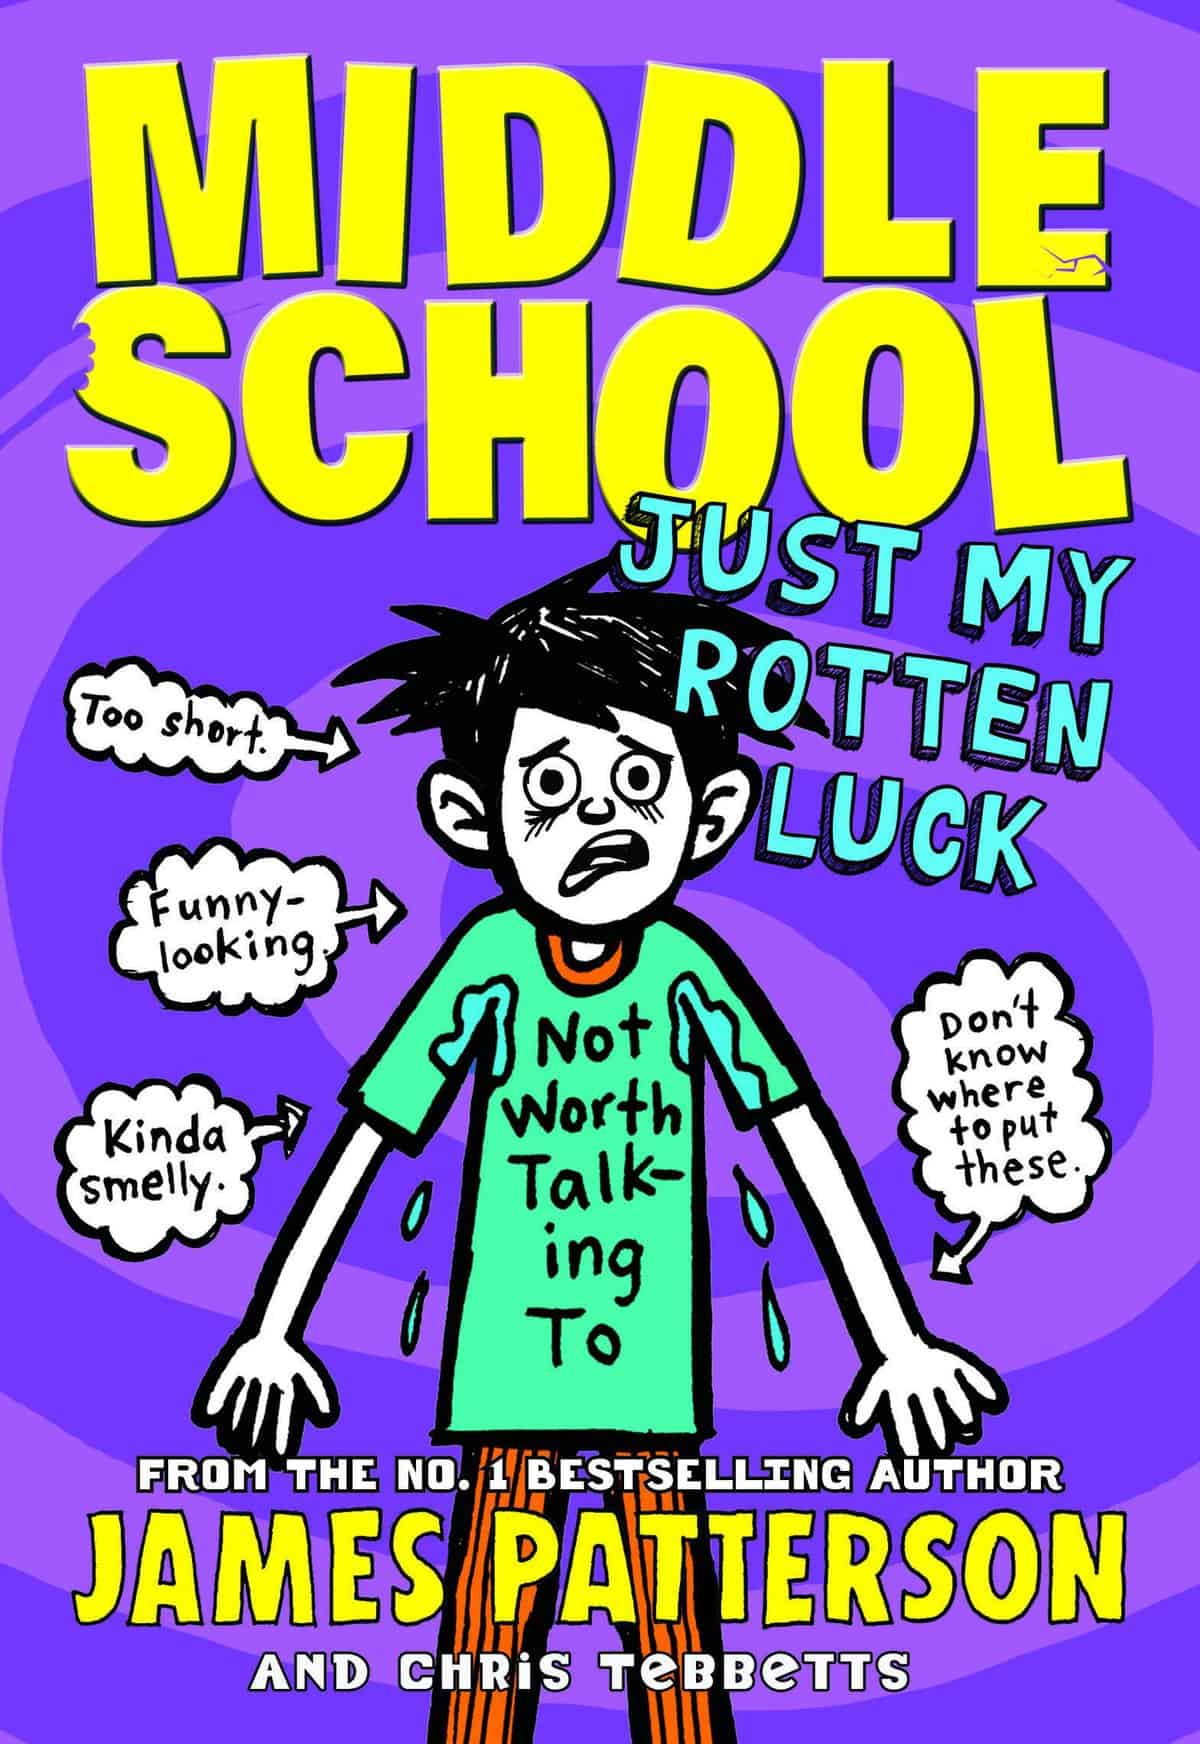 Check out the new Middle School book! Fun Kids the UK's children's